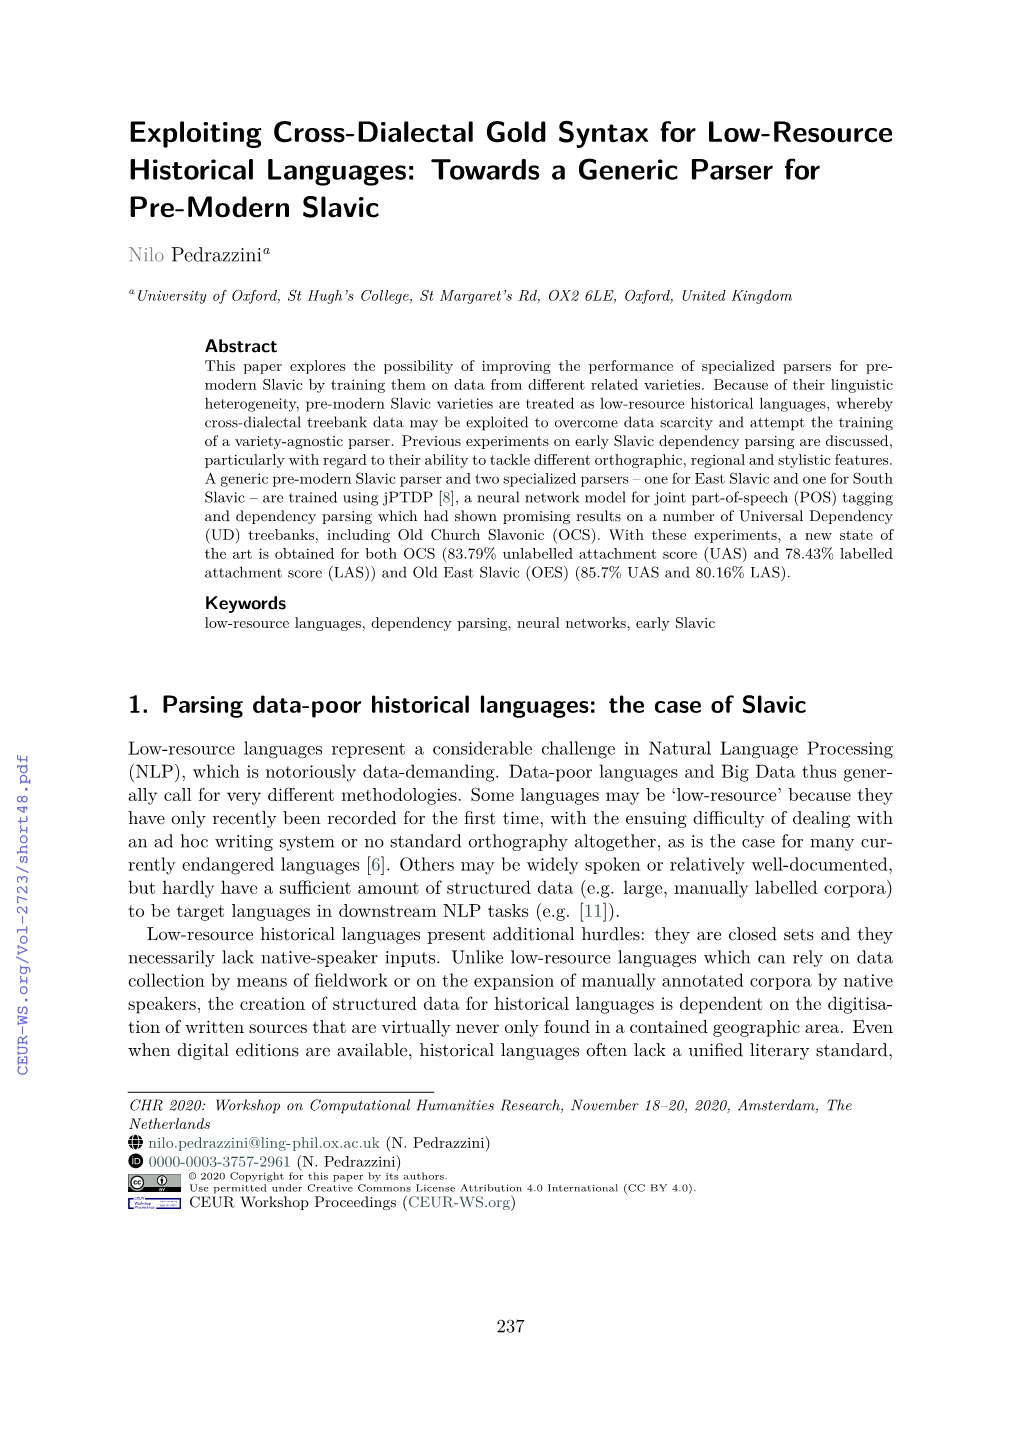 Exploiting Cross-Dialectal Gold Syntax for Low-Resource Historical Languages: Towards a Generic Parser for Pre-Modern Slavic